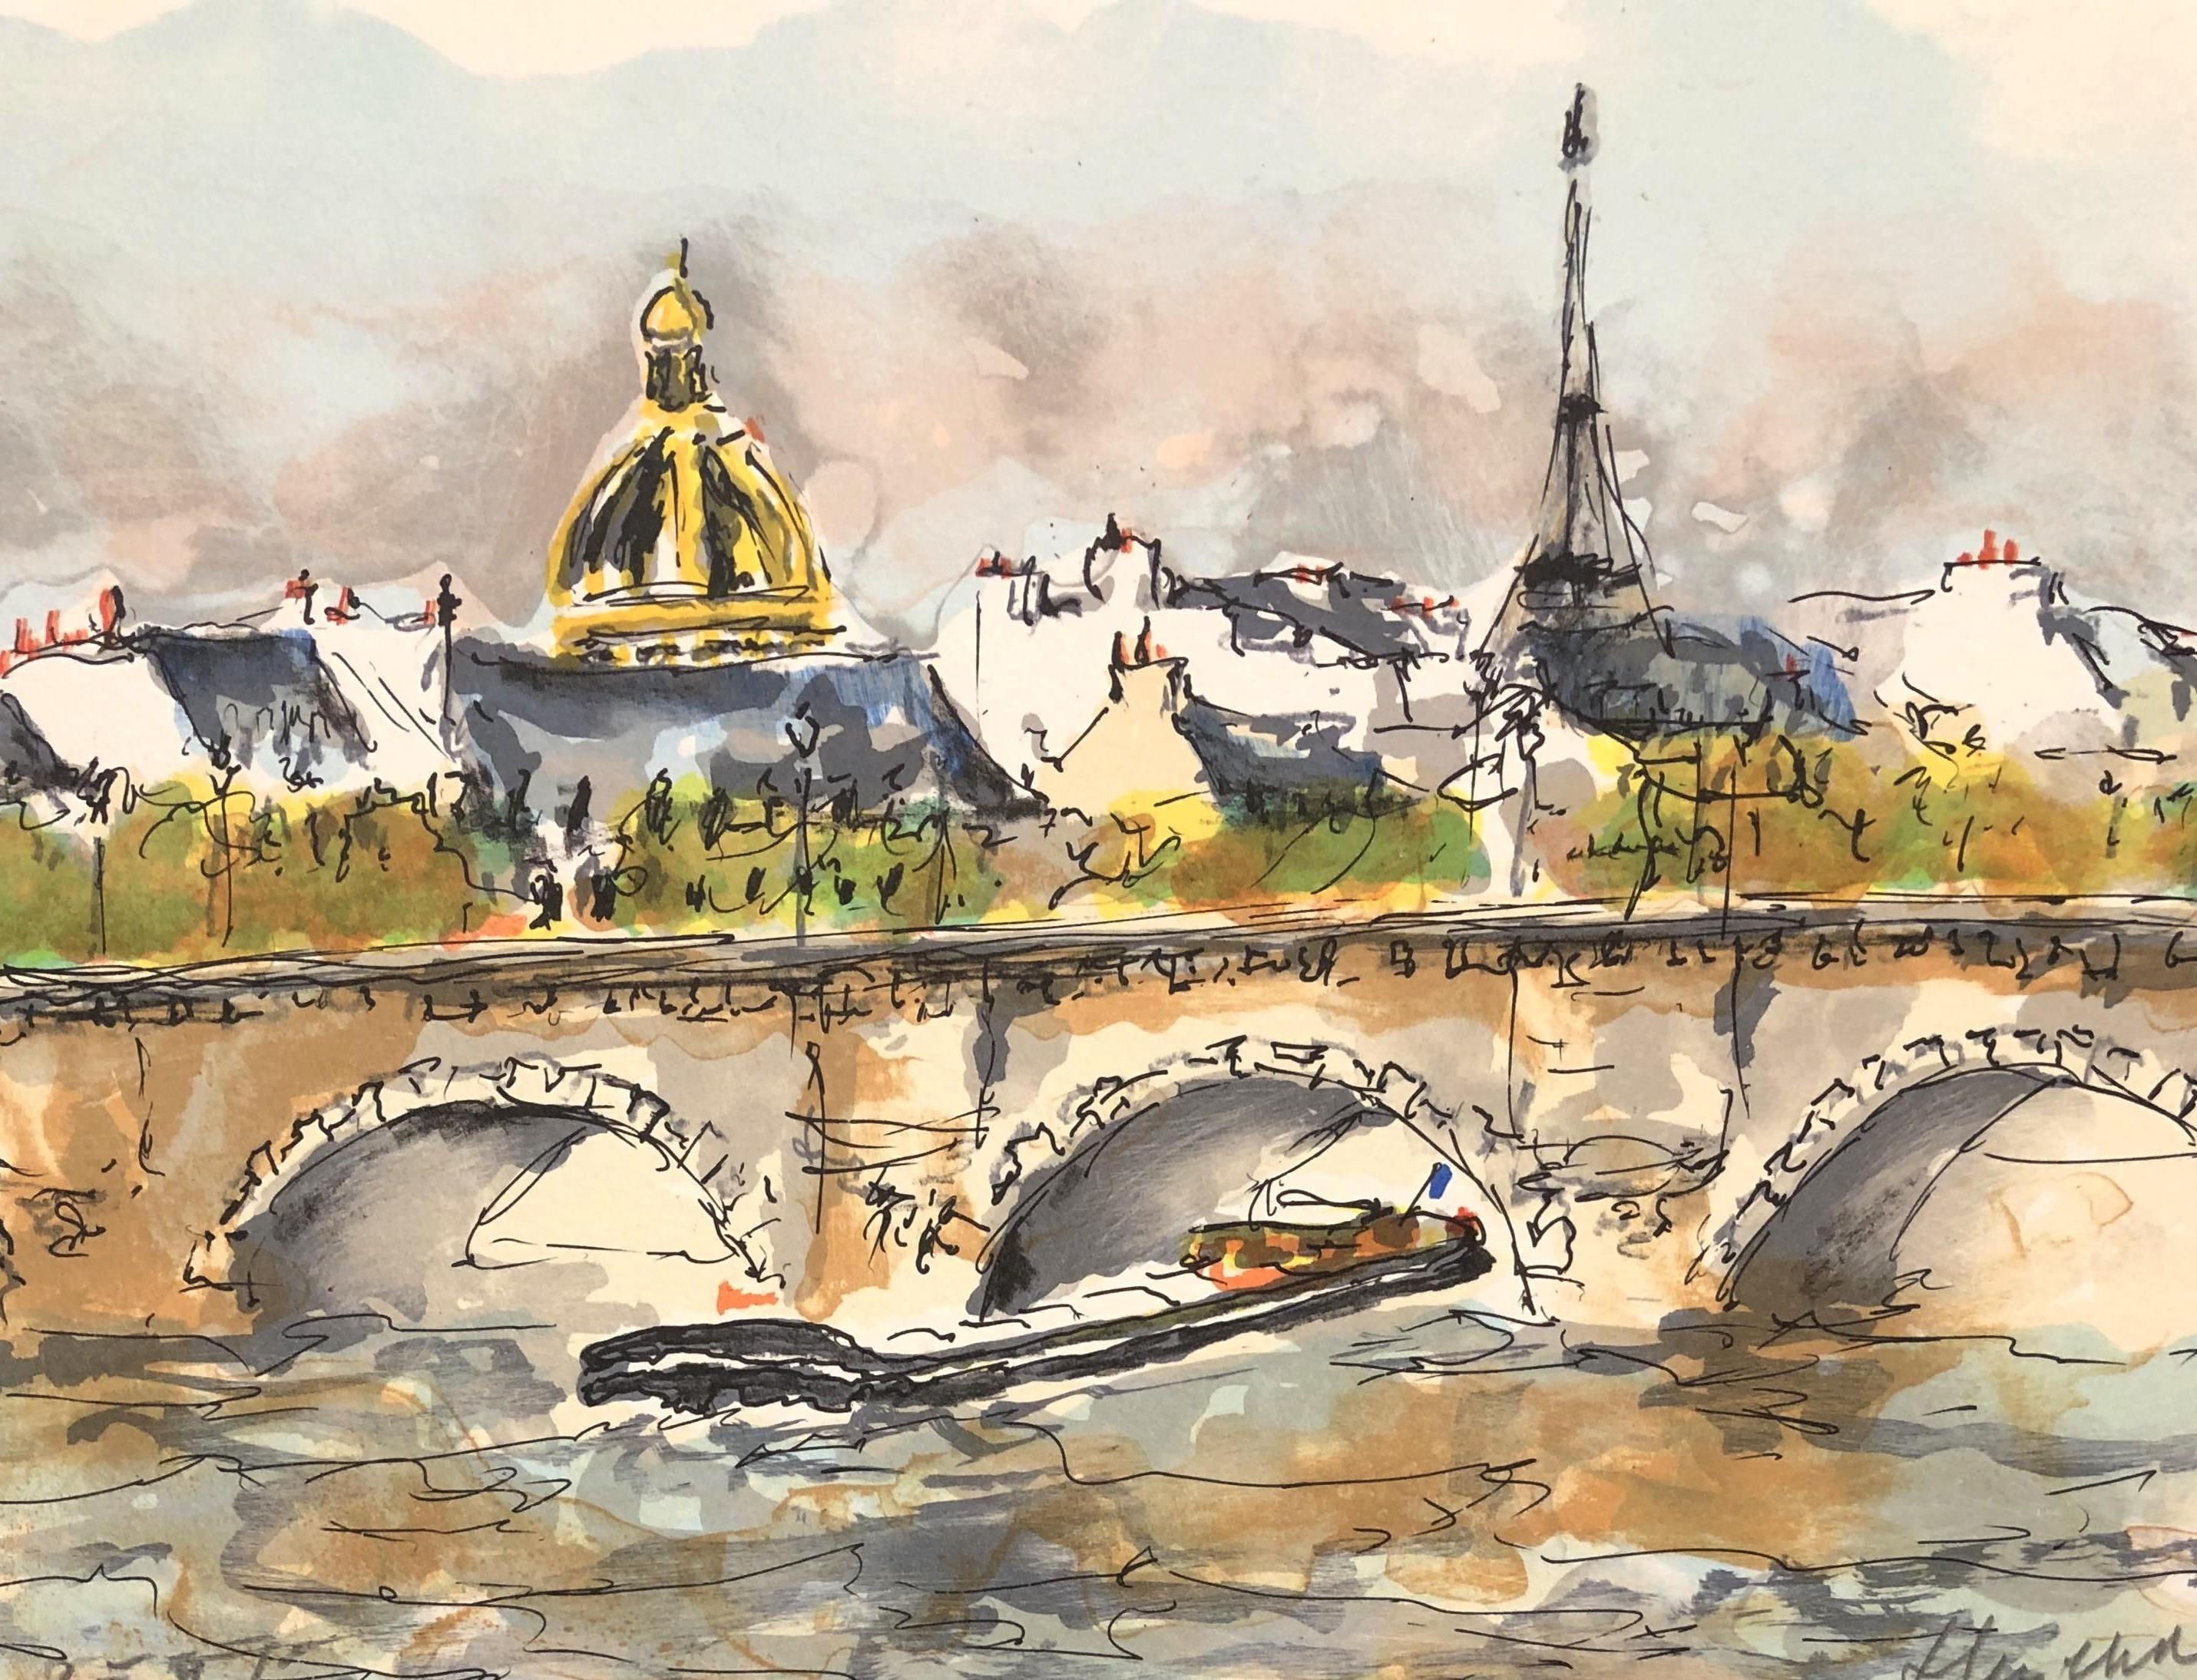 Paris - Seine and Eiffel Tower - Original Lithograph Handsigned and Numbered - Print by Urbain Huchet